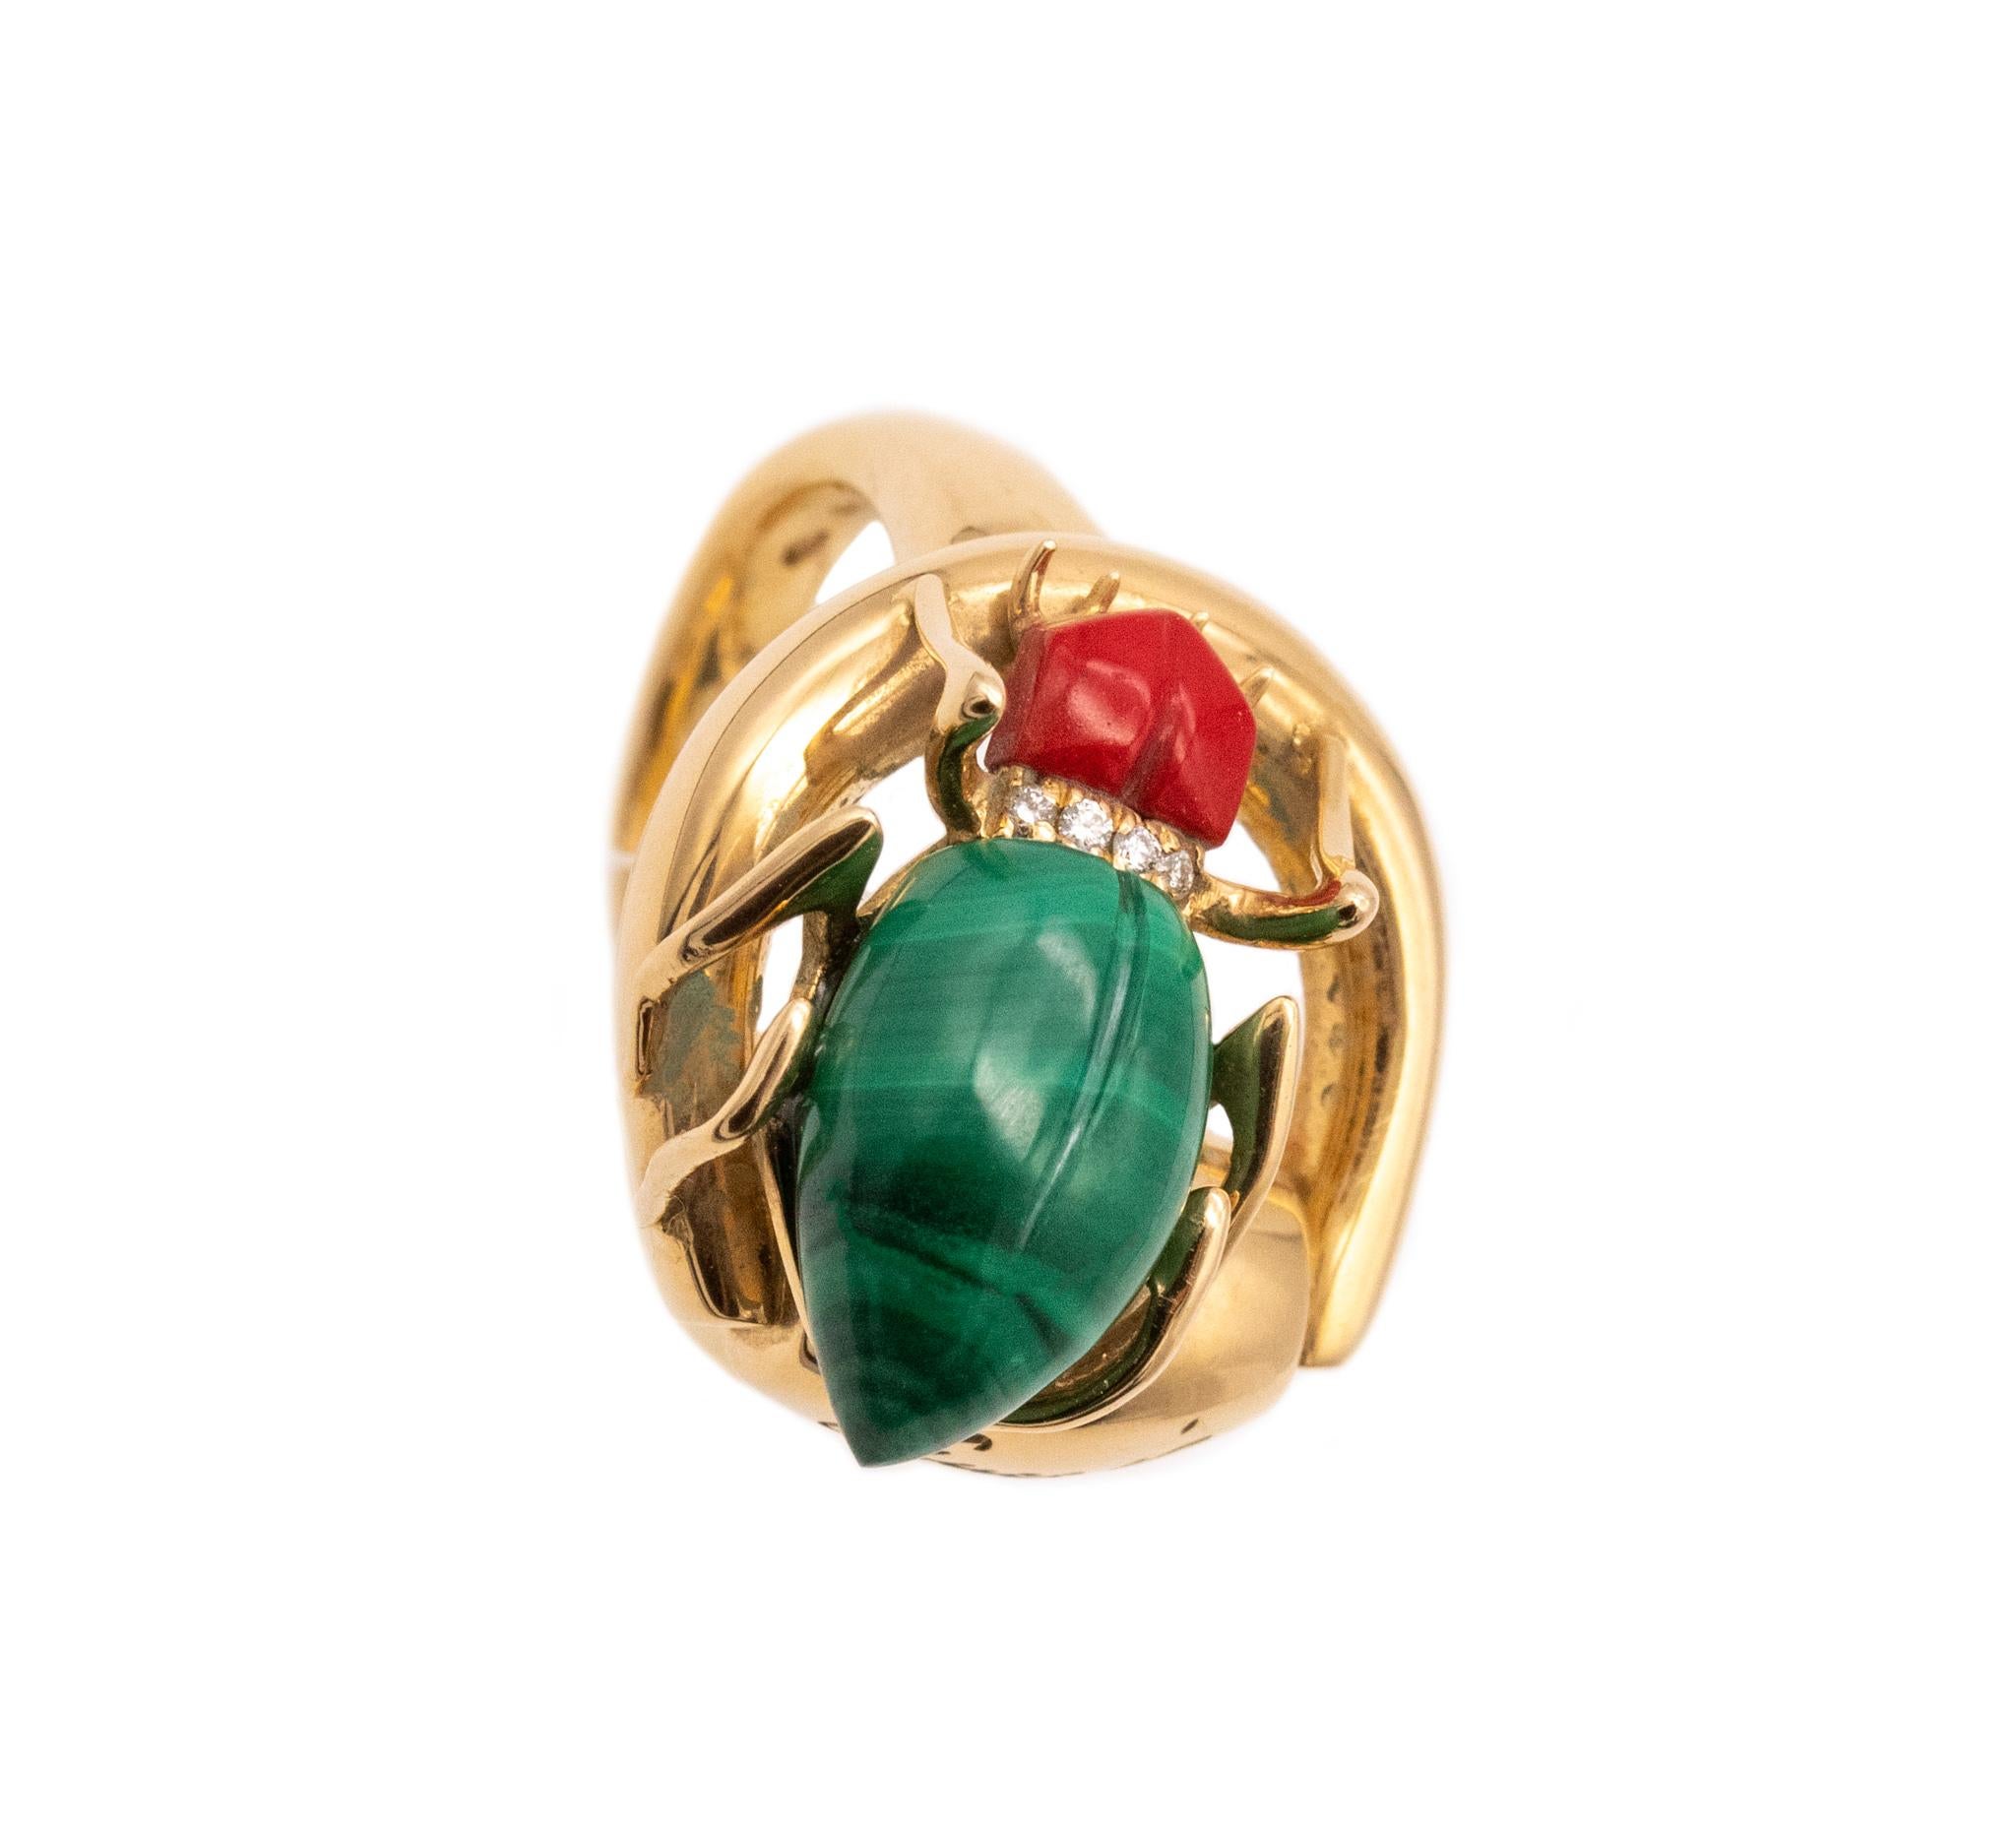 Women's or Men's Gucci Milano 18Kt Yellow Gold Beetle Ring with Diamonds, Coral and Malachite